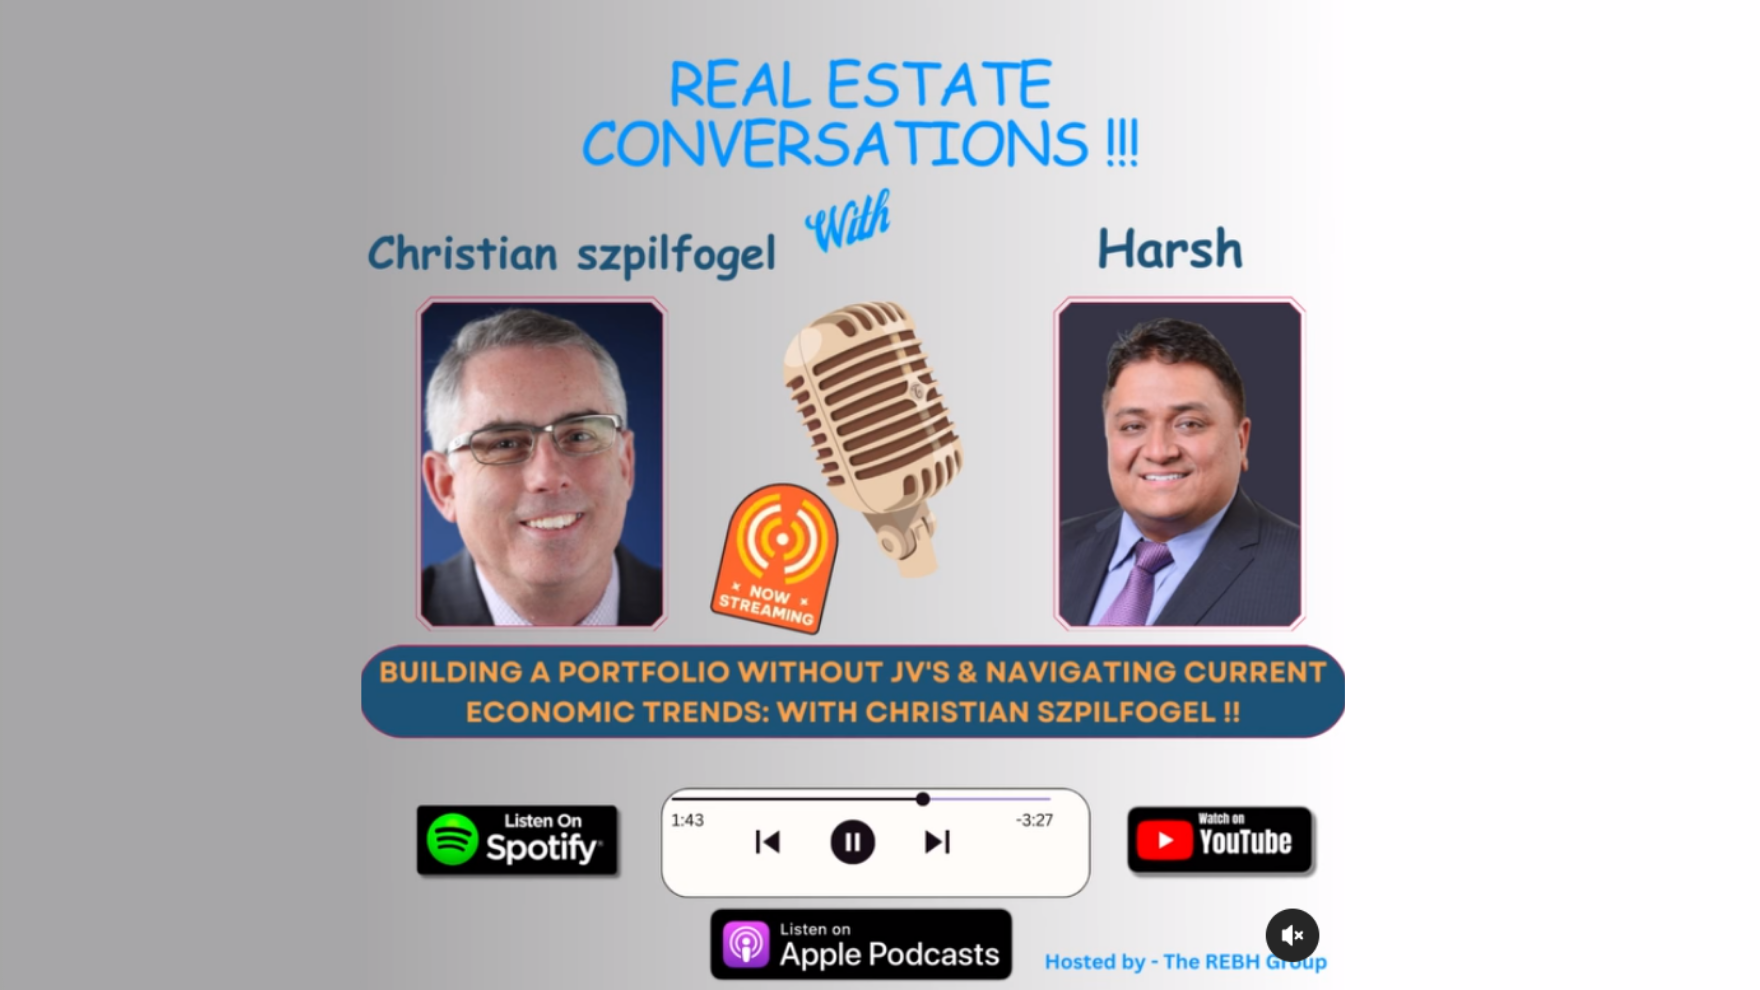 Building a Portfolio without JV’s & Navigating Current Economic Trends (Real Estate Conversations with Harsh)